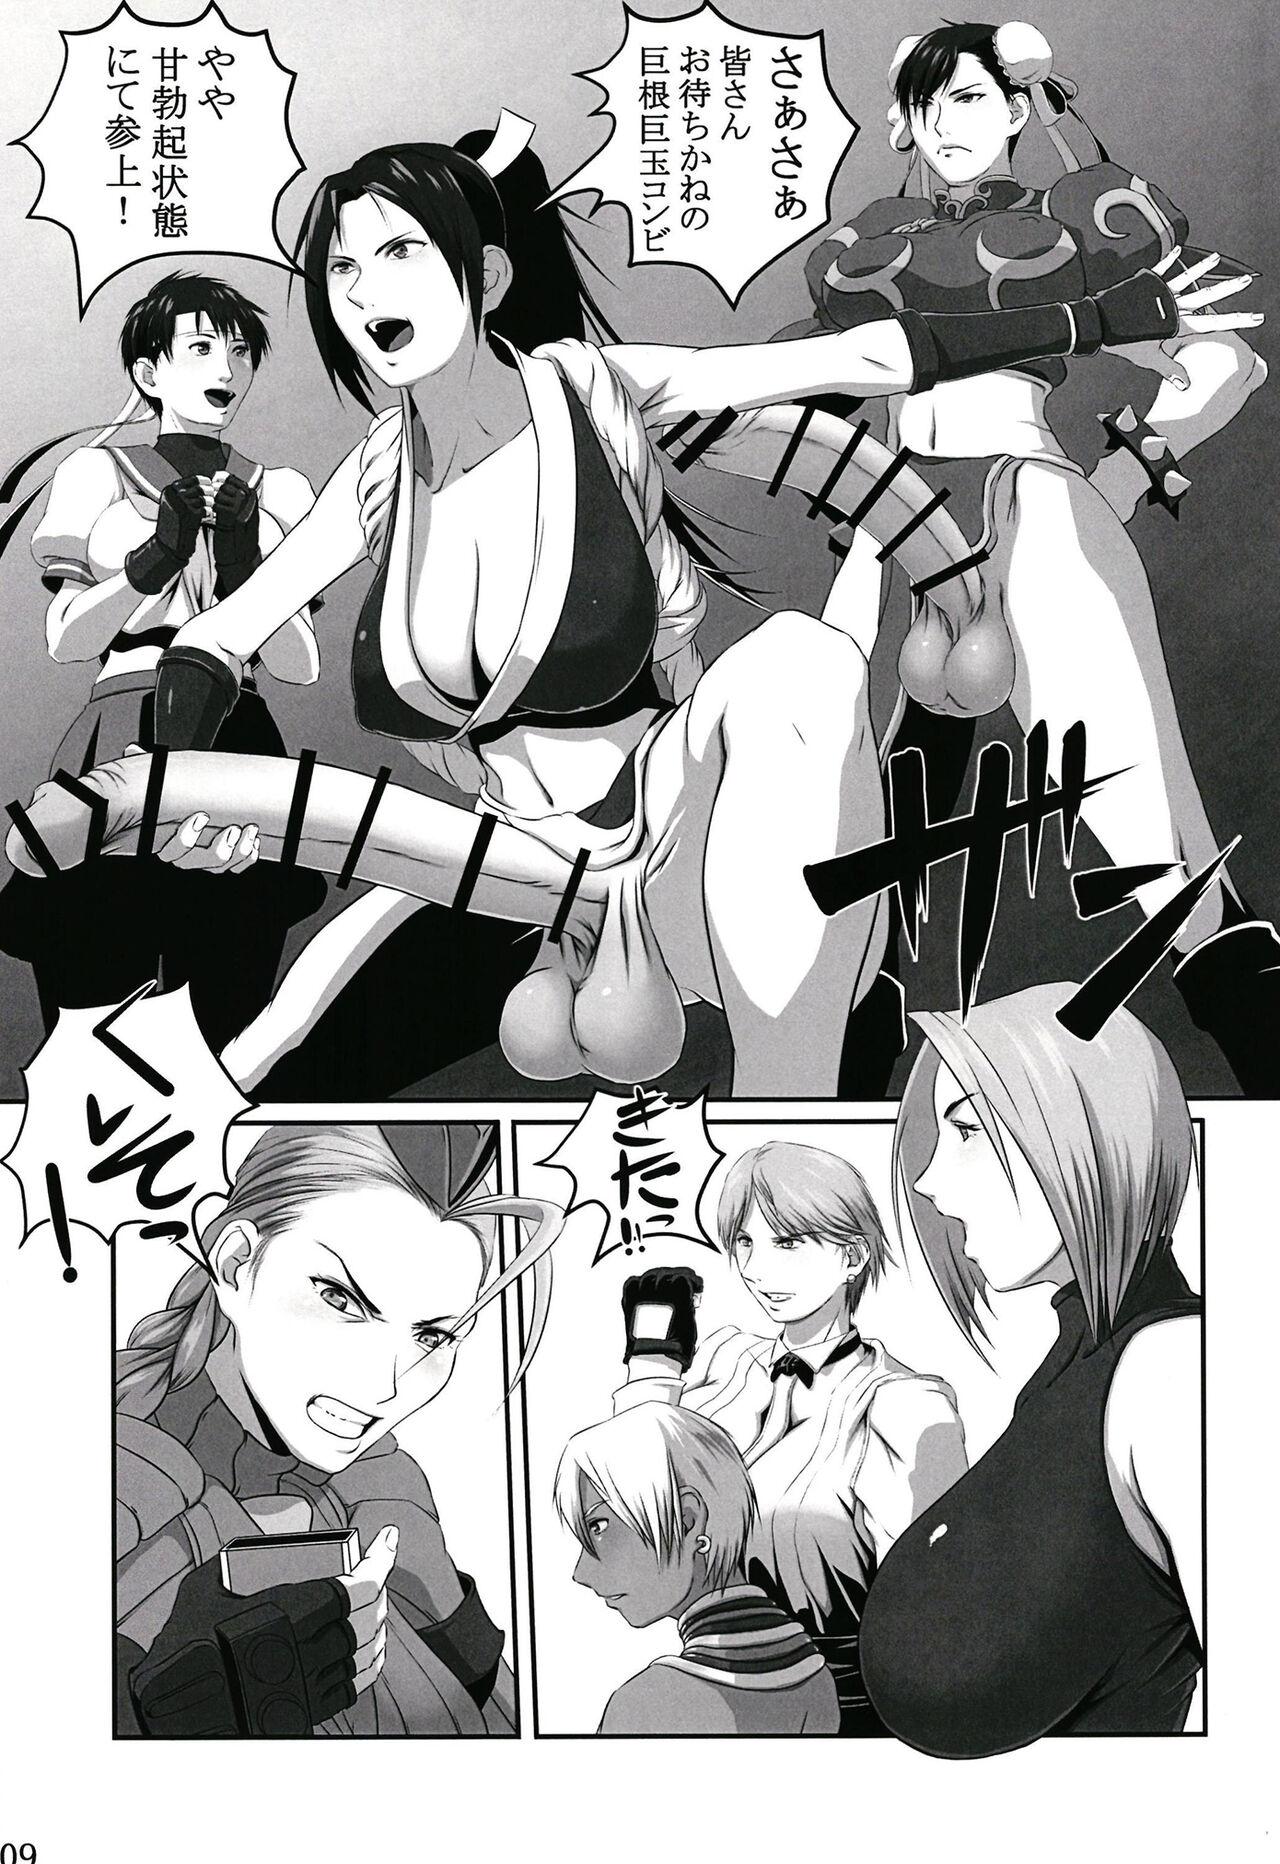 Spreadeagle Shiranuhi Ninpo cho ichi-kan - Street fighter King of fighters Super Hot Porn - Page 6